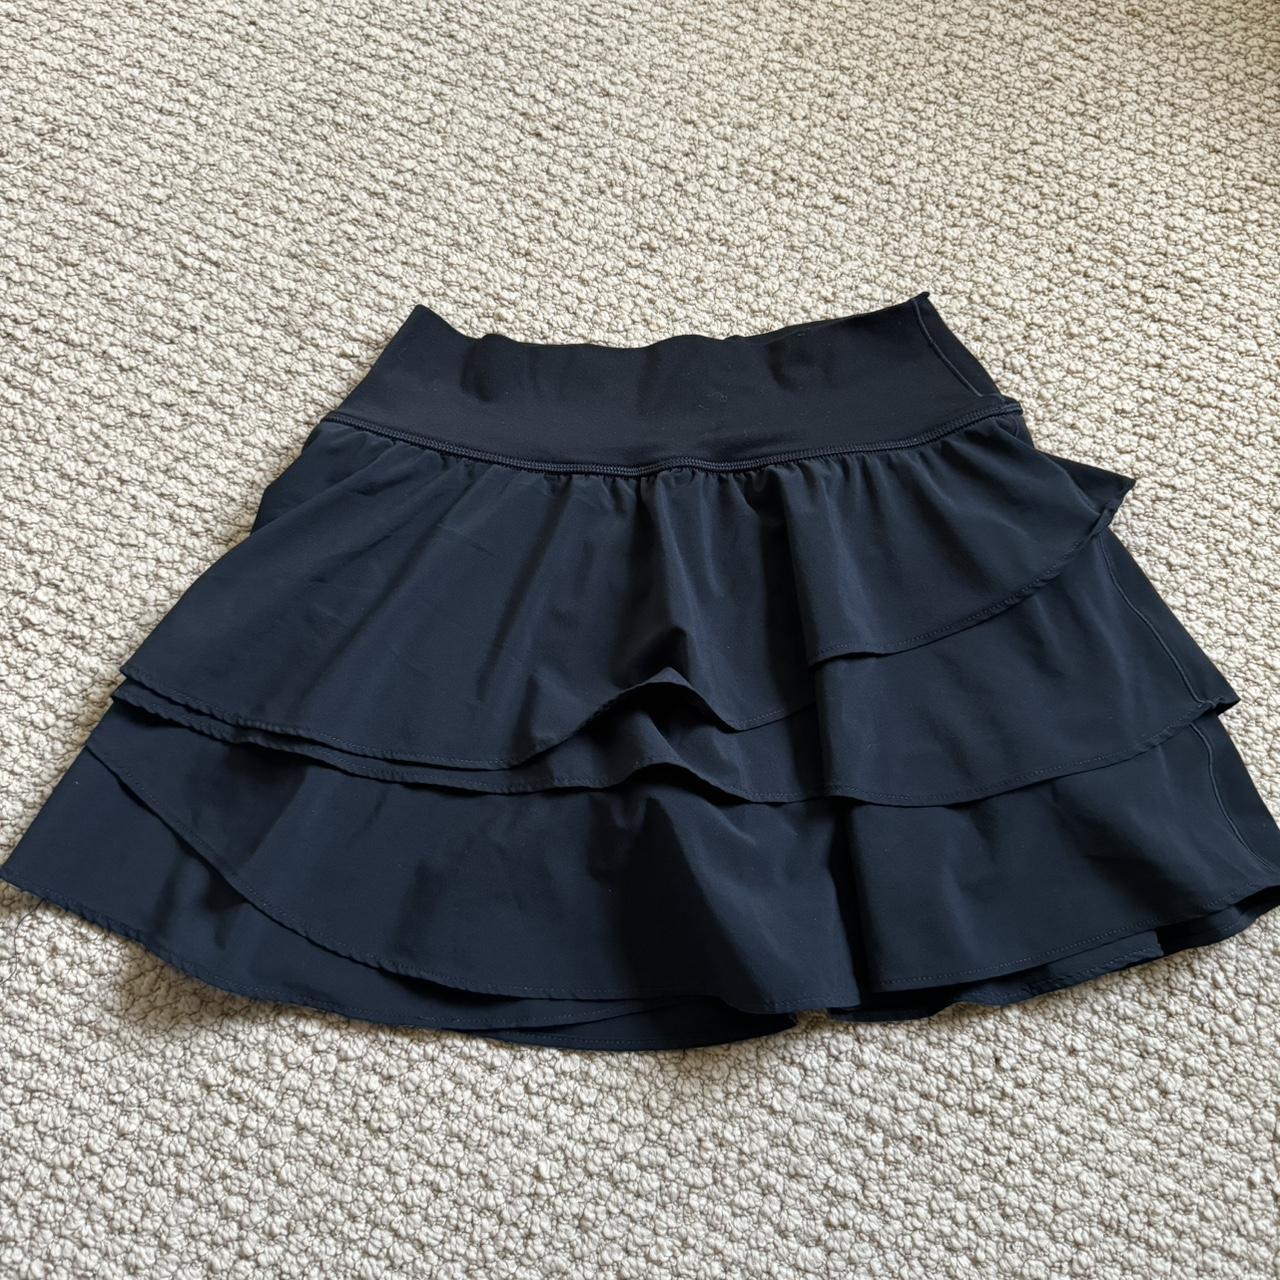 Small Aerie tennis skirt with build in shorts. Only... - Depop